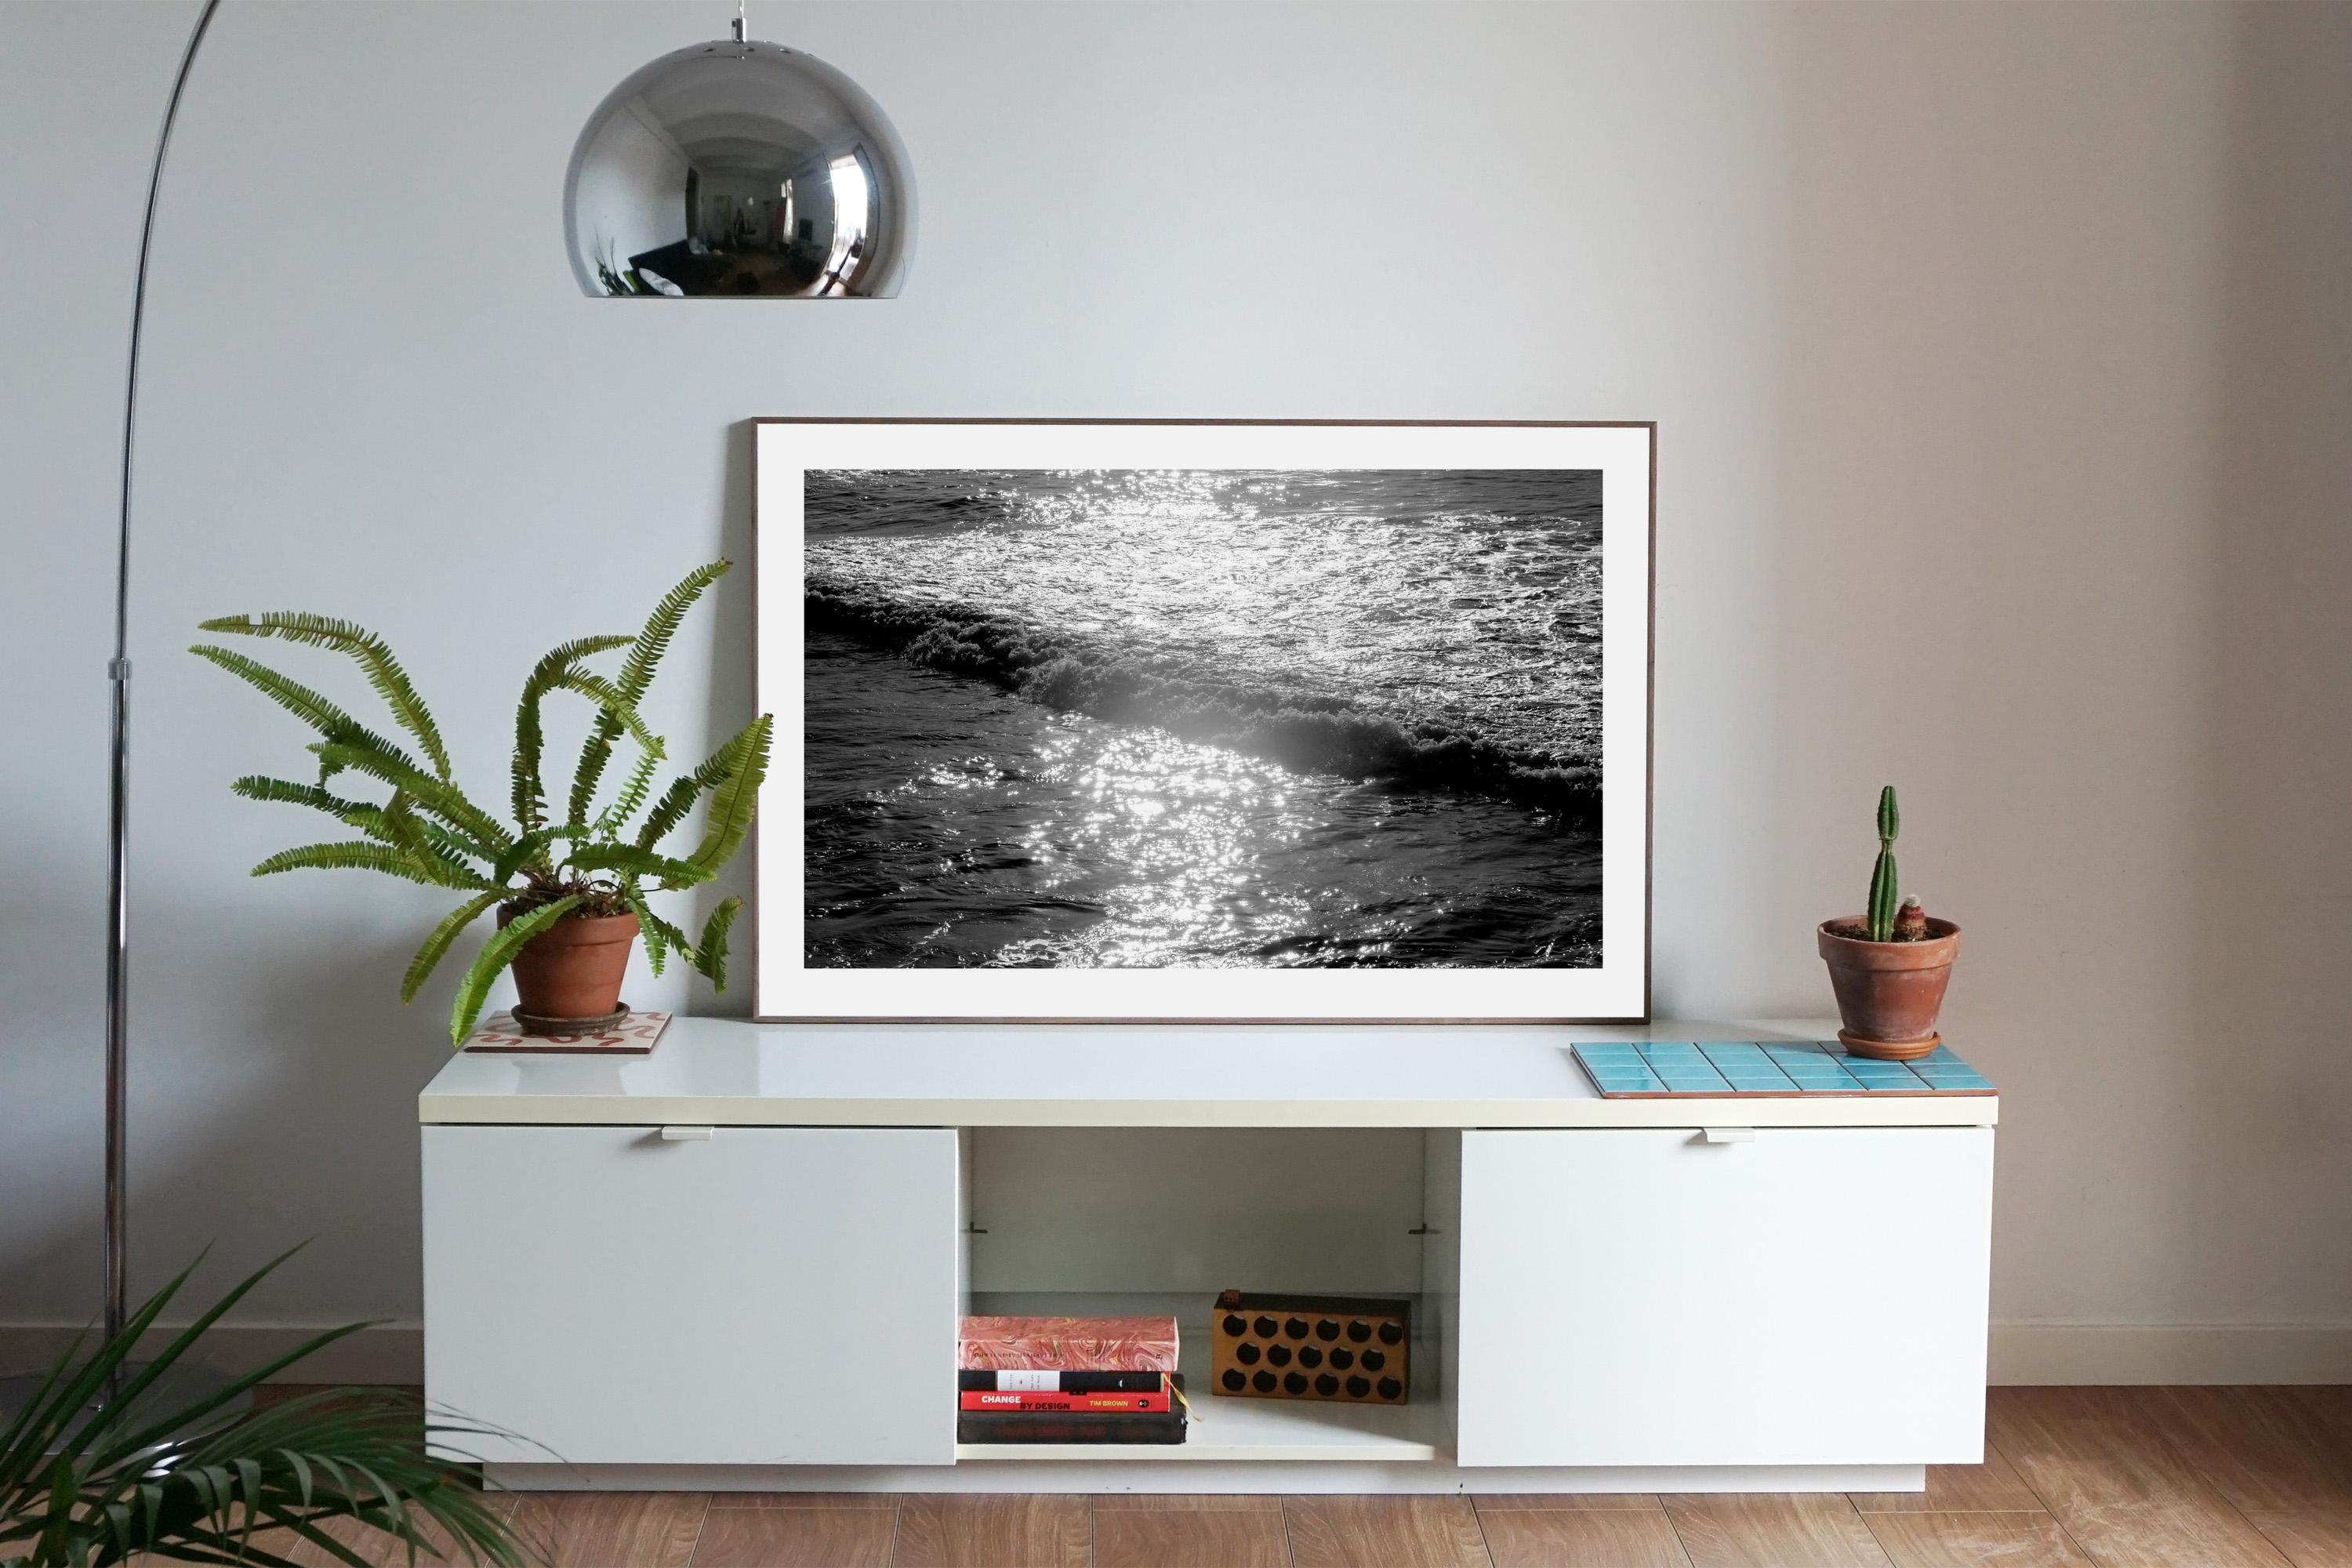 Water Reflection, Seascape Black and White Giclée Print, Pacific Sunset Waves - Gray Landscape Photograph by Kind of Cyan